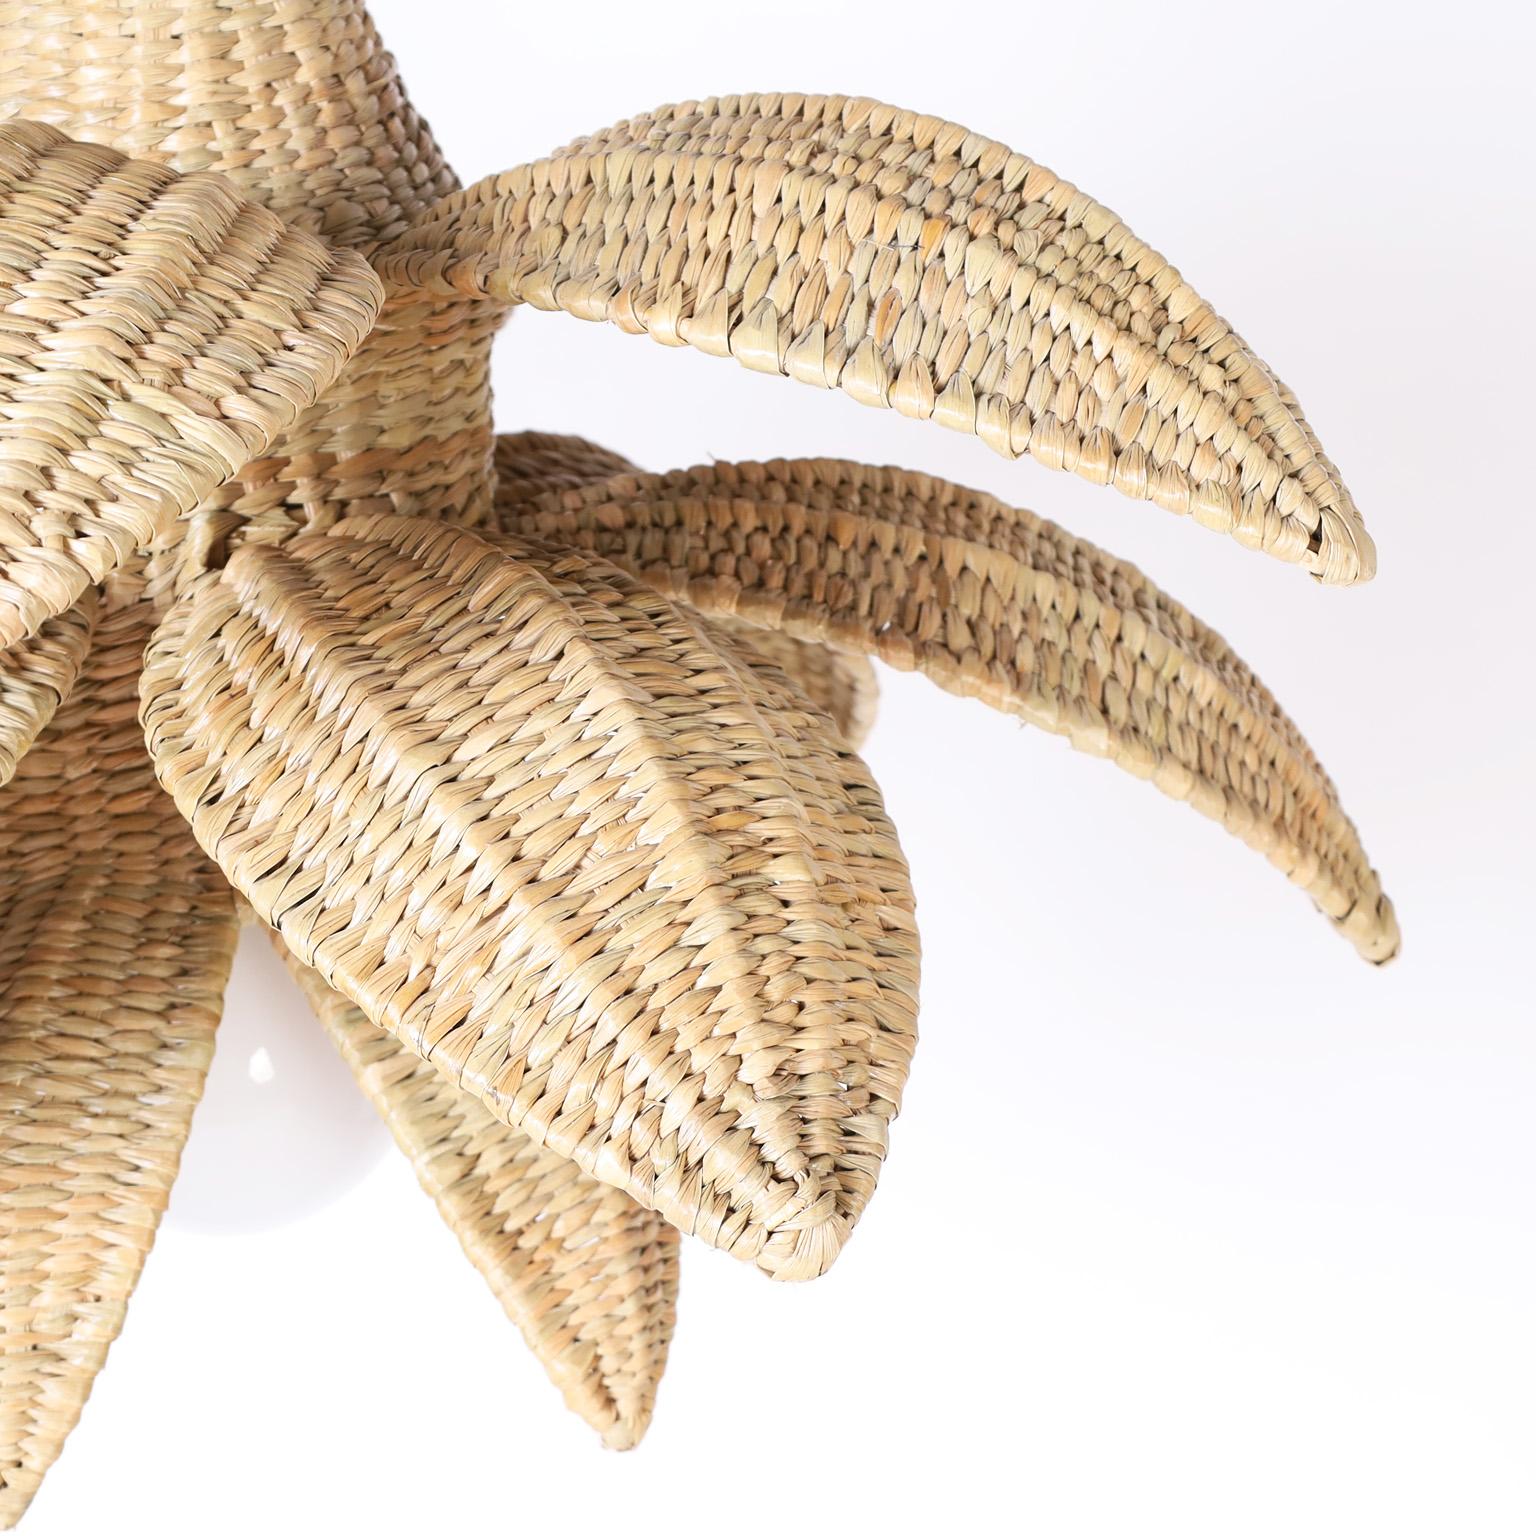 Mid-Century Modern Sanibel Wicker Palm Leaf or Lotus Pendant from the FS Flores Collection